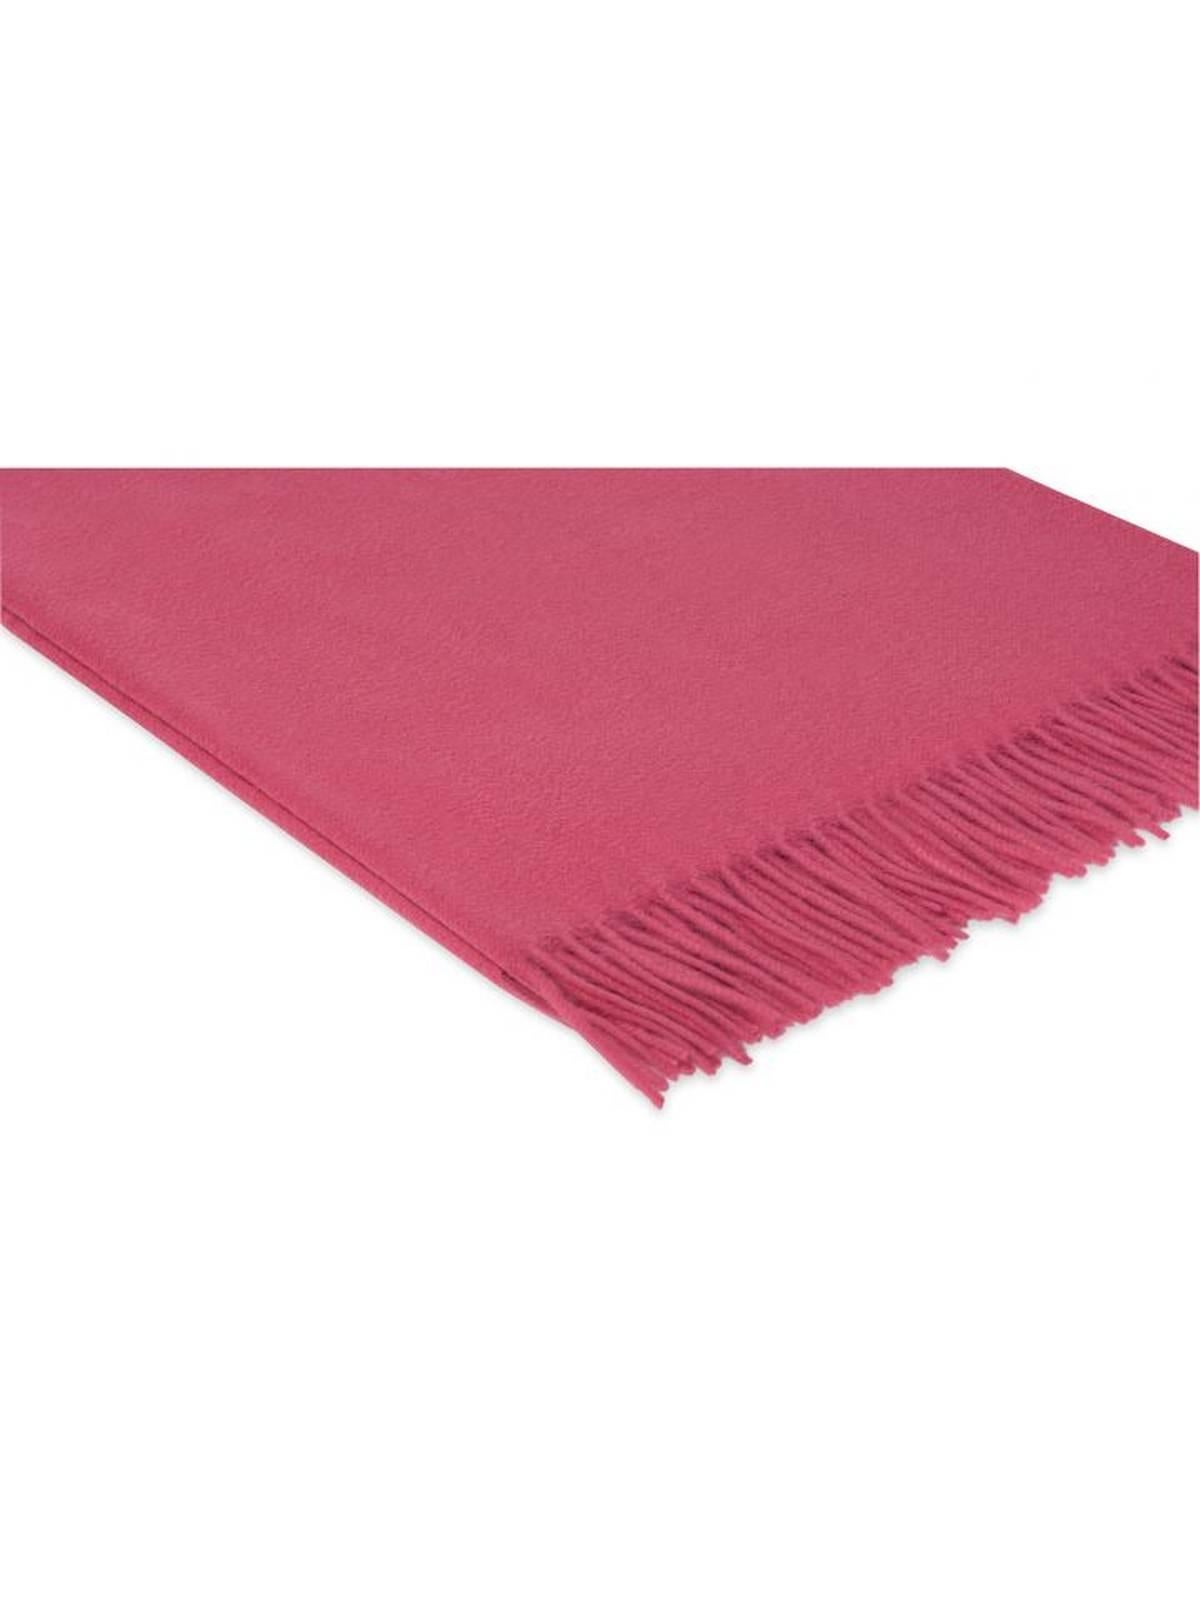 100% Italian cashmere finished with natural brushing made with thistles. 360 gram/sq meter.